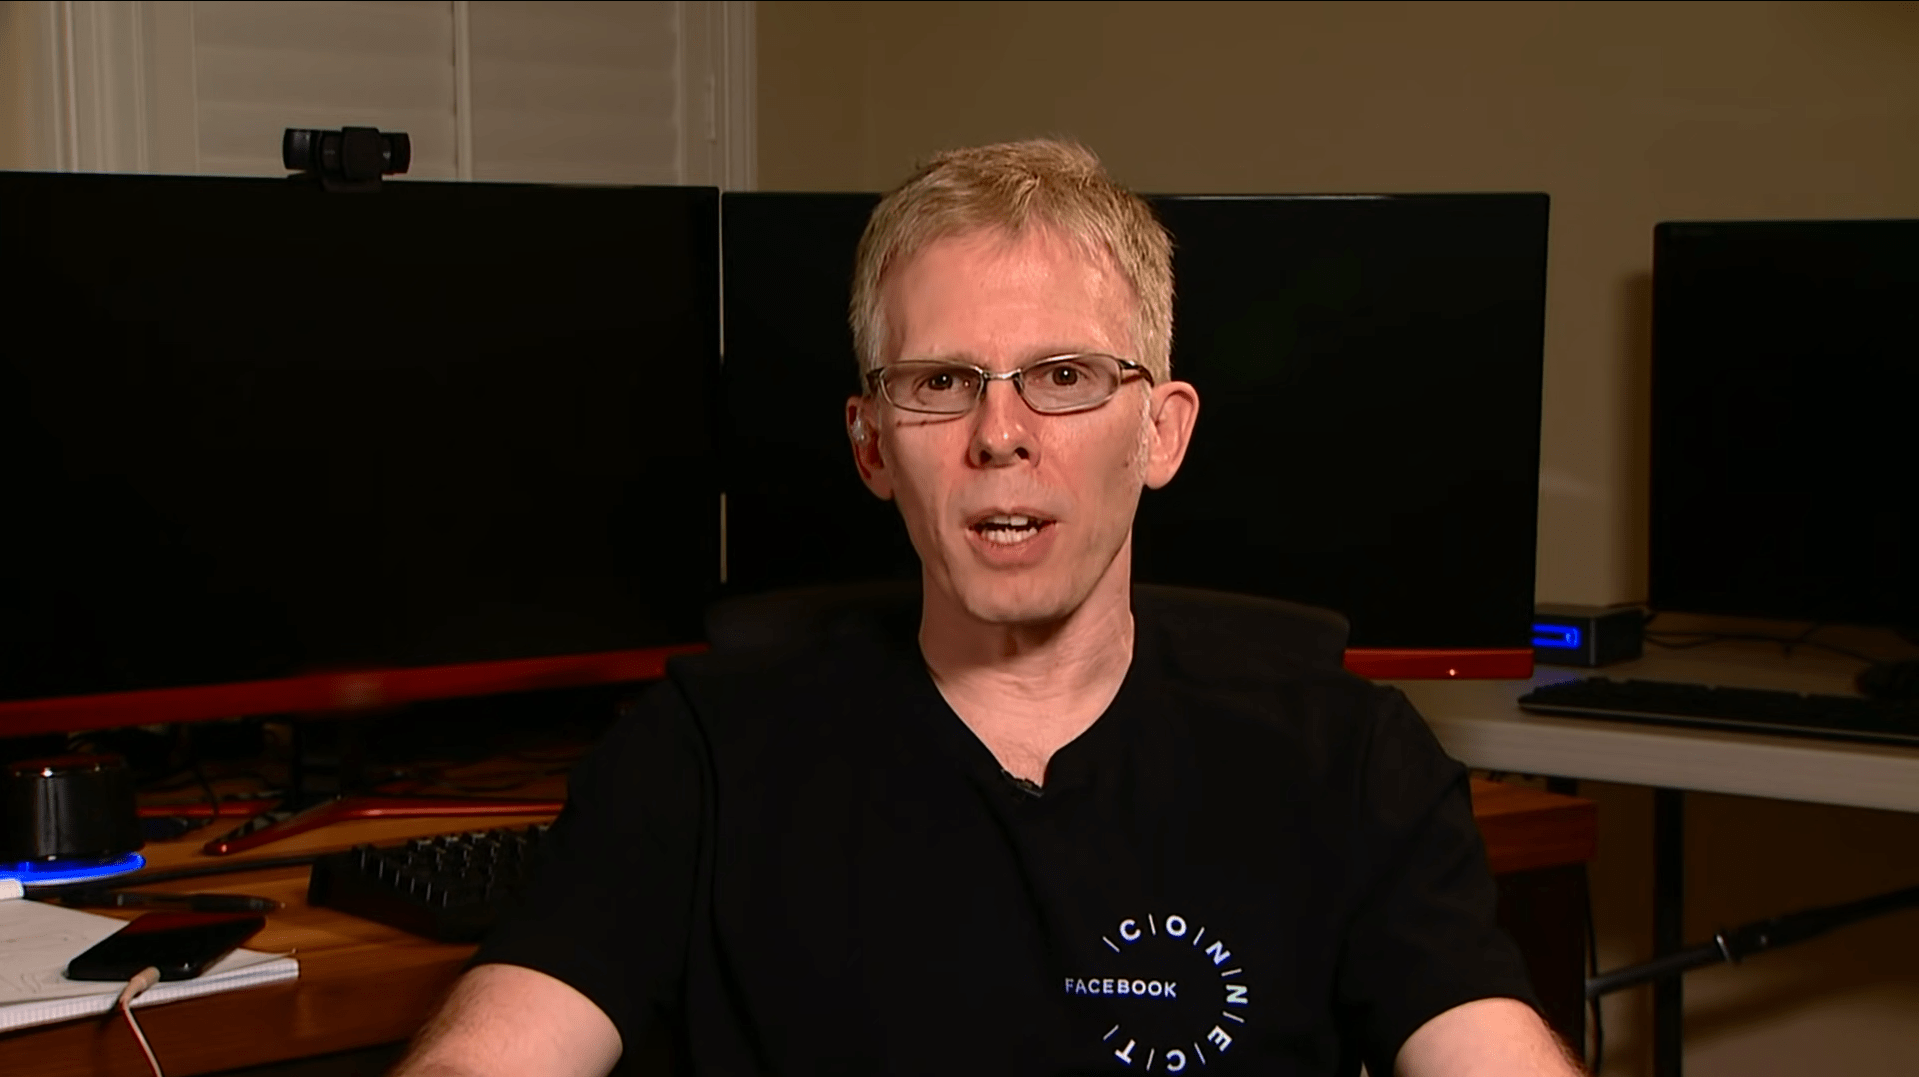 Meta Connect 2022: Carmack will in Virtual Reality vortragen